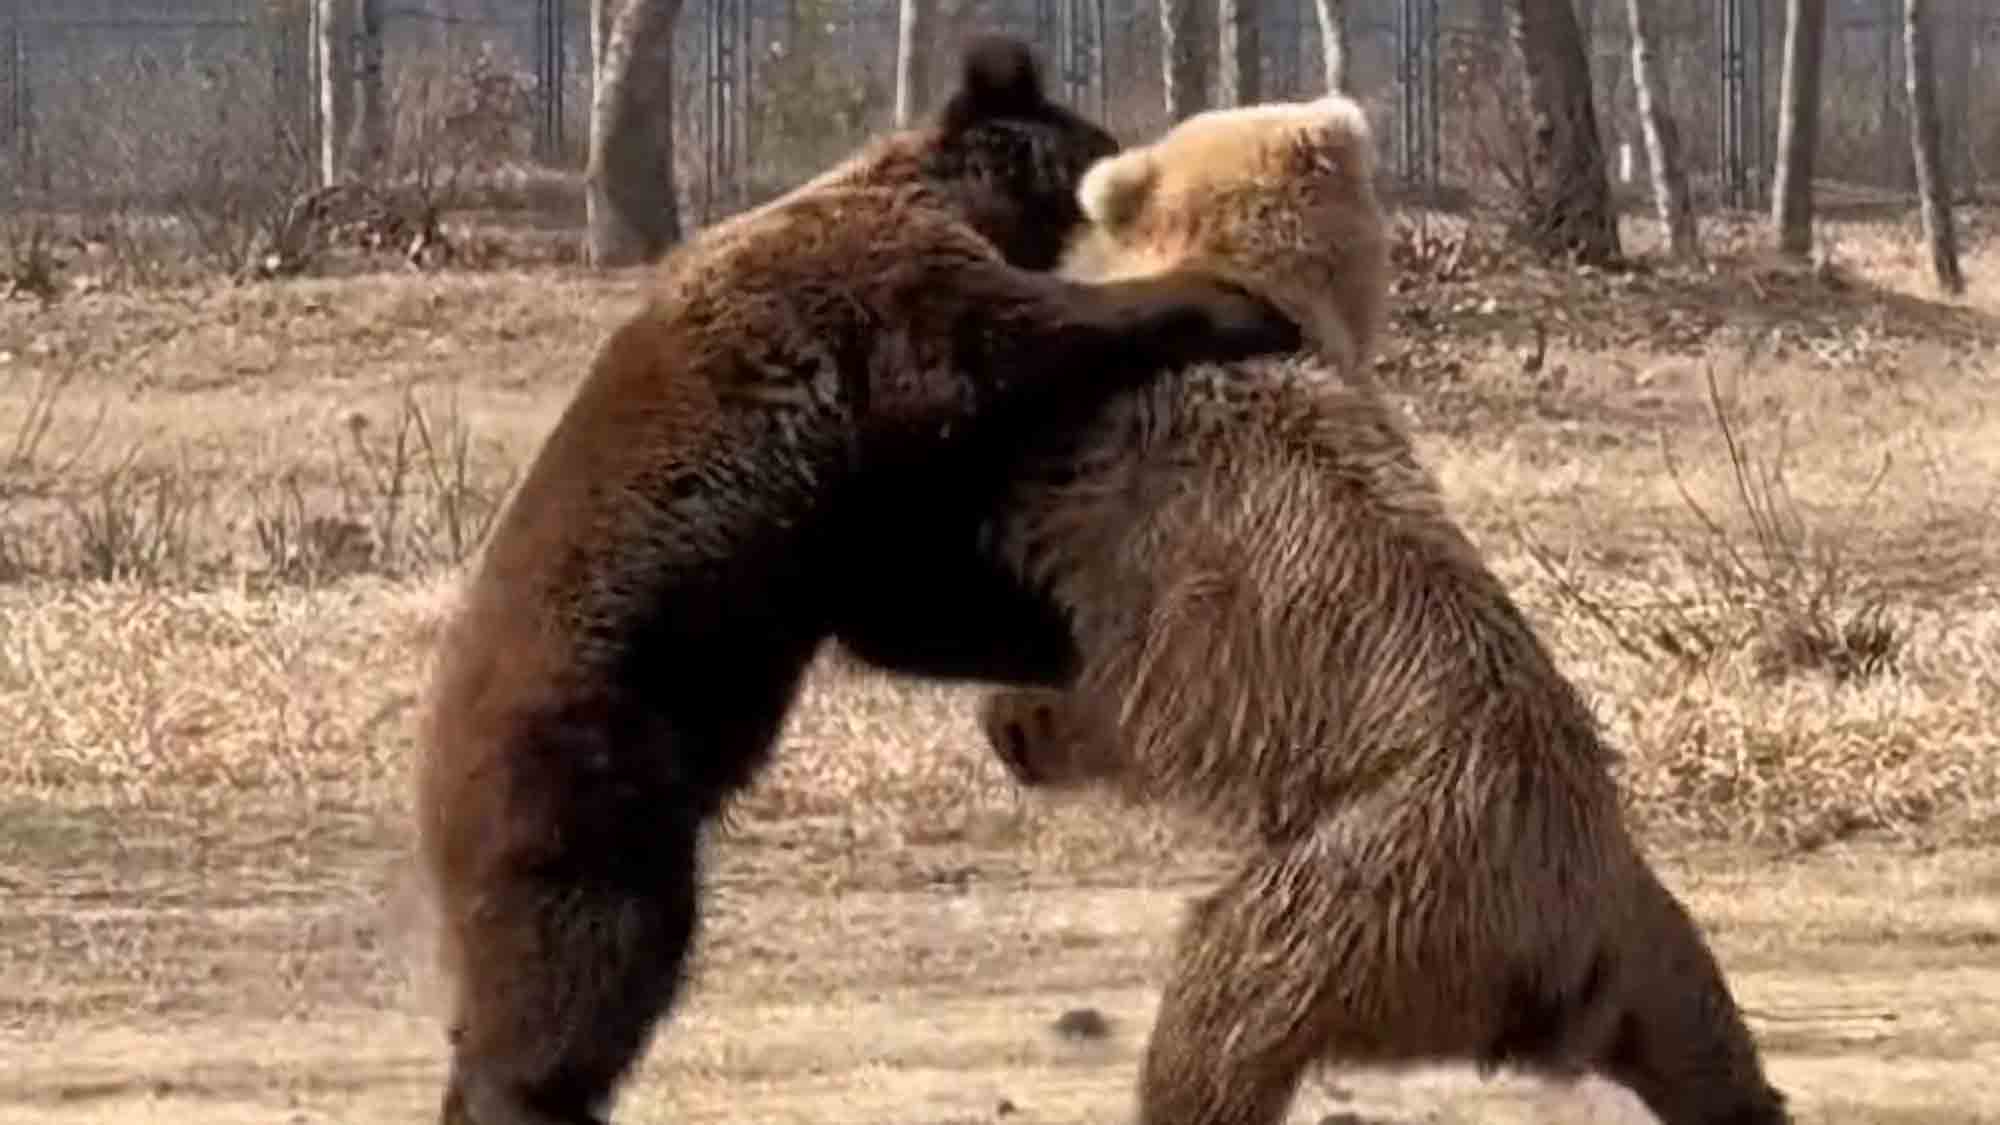 Two Brown Bears Wrestle Over Carrot Before A Third One Intervenes To Break Them Up